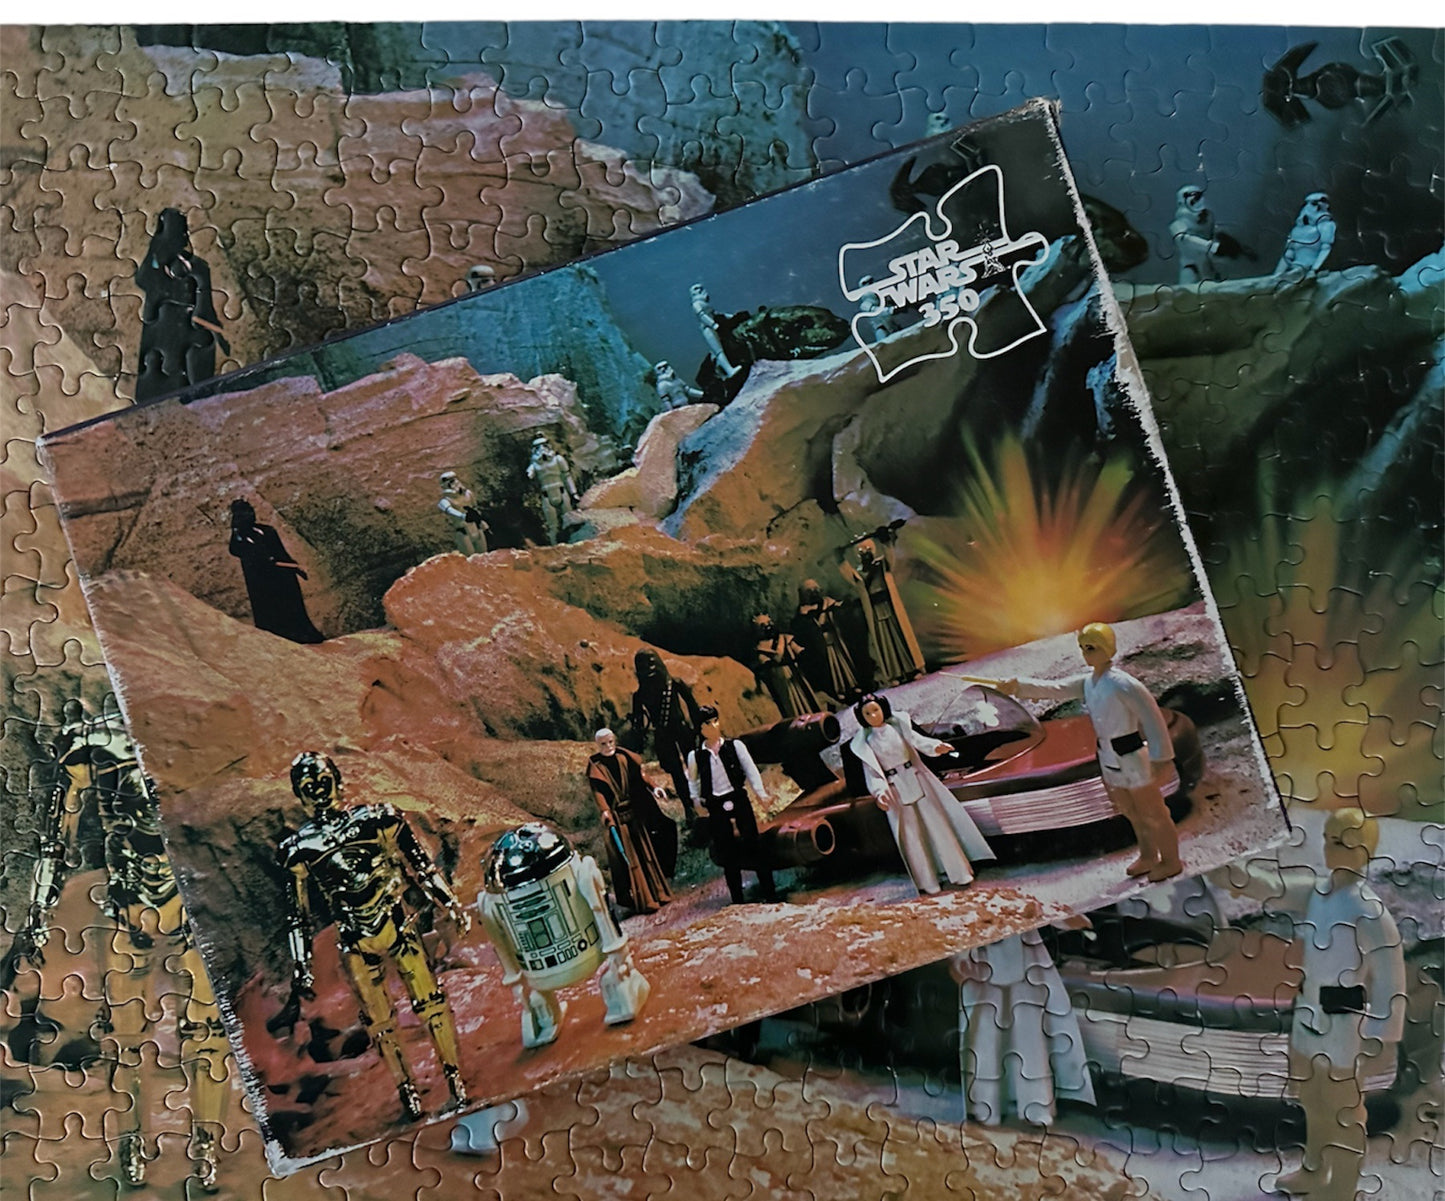 Vintage 1979 Waddingtons Star Wars Kenners Action Figures 350 Piece Jigsaw Puzzle No. 194A - Encounter On Tatooine - 100% Complete In The Original Box - Very Very Rare